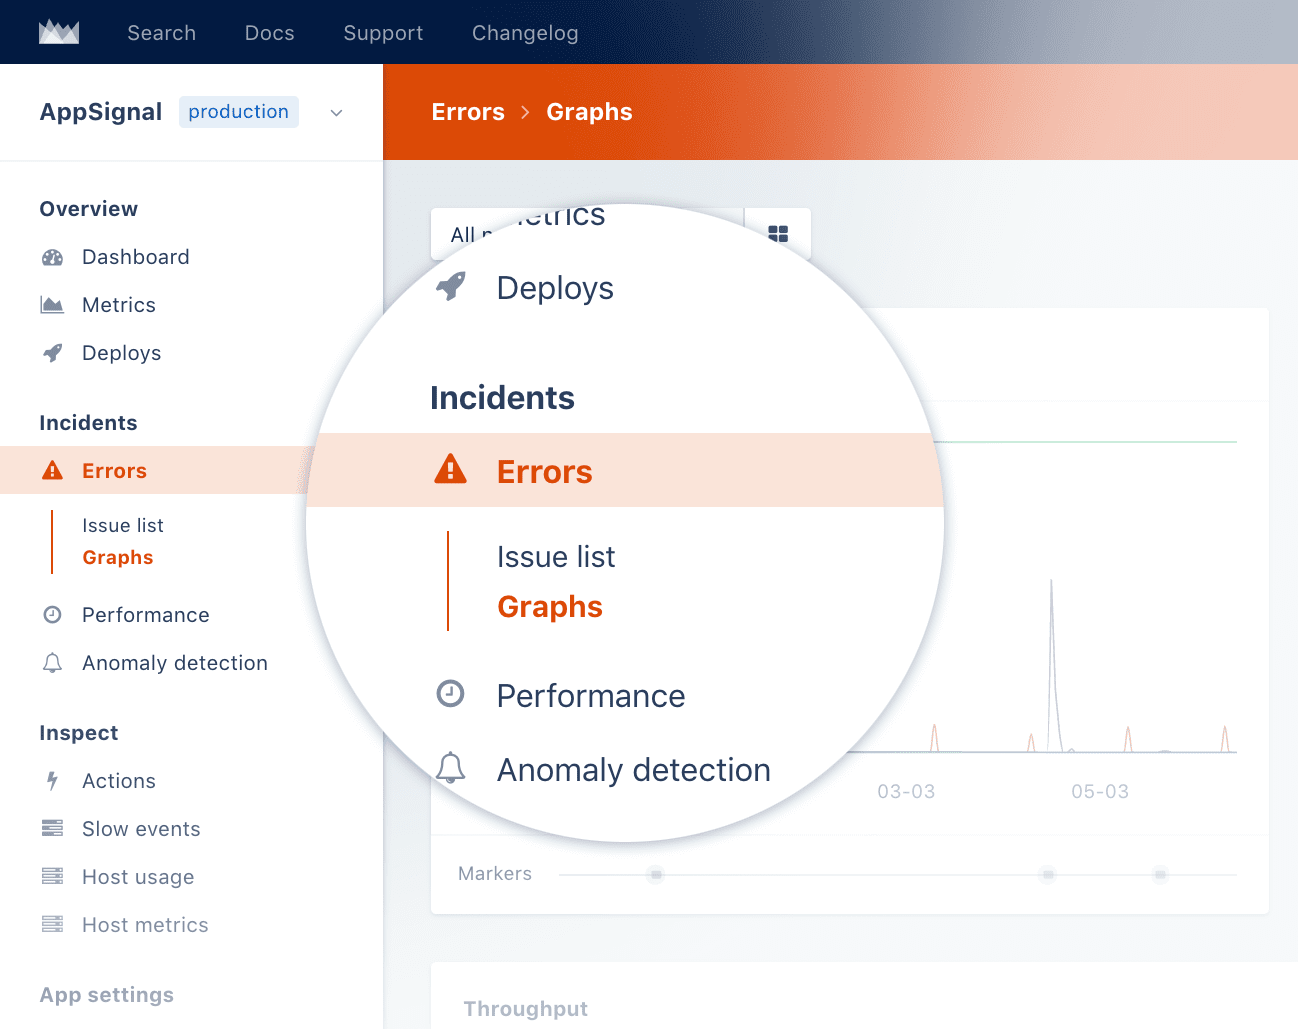 Improved navigation for better feature discovery.